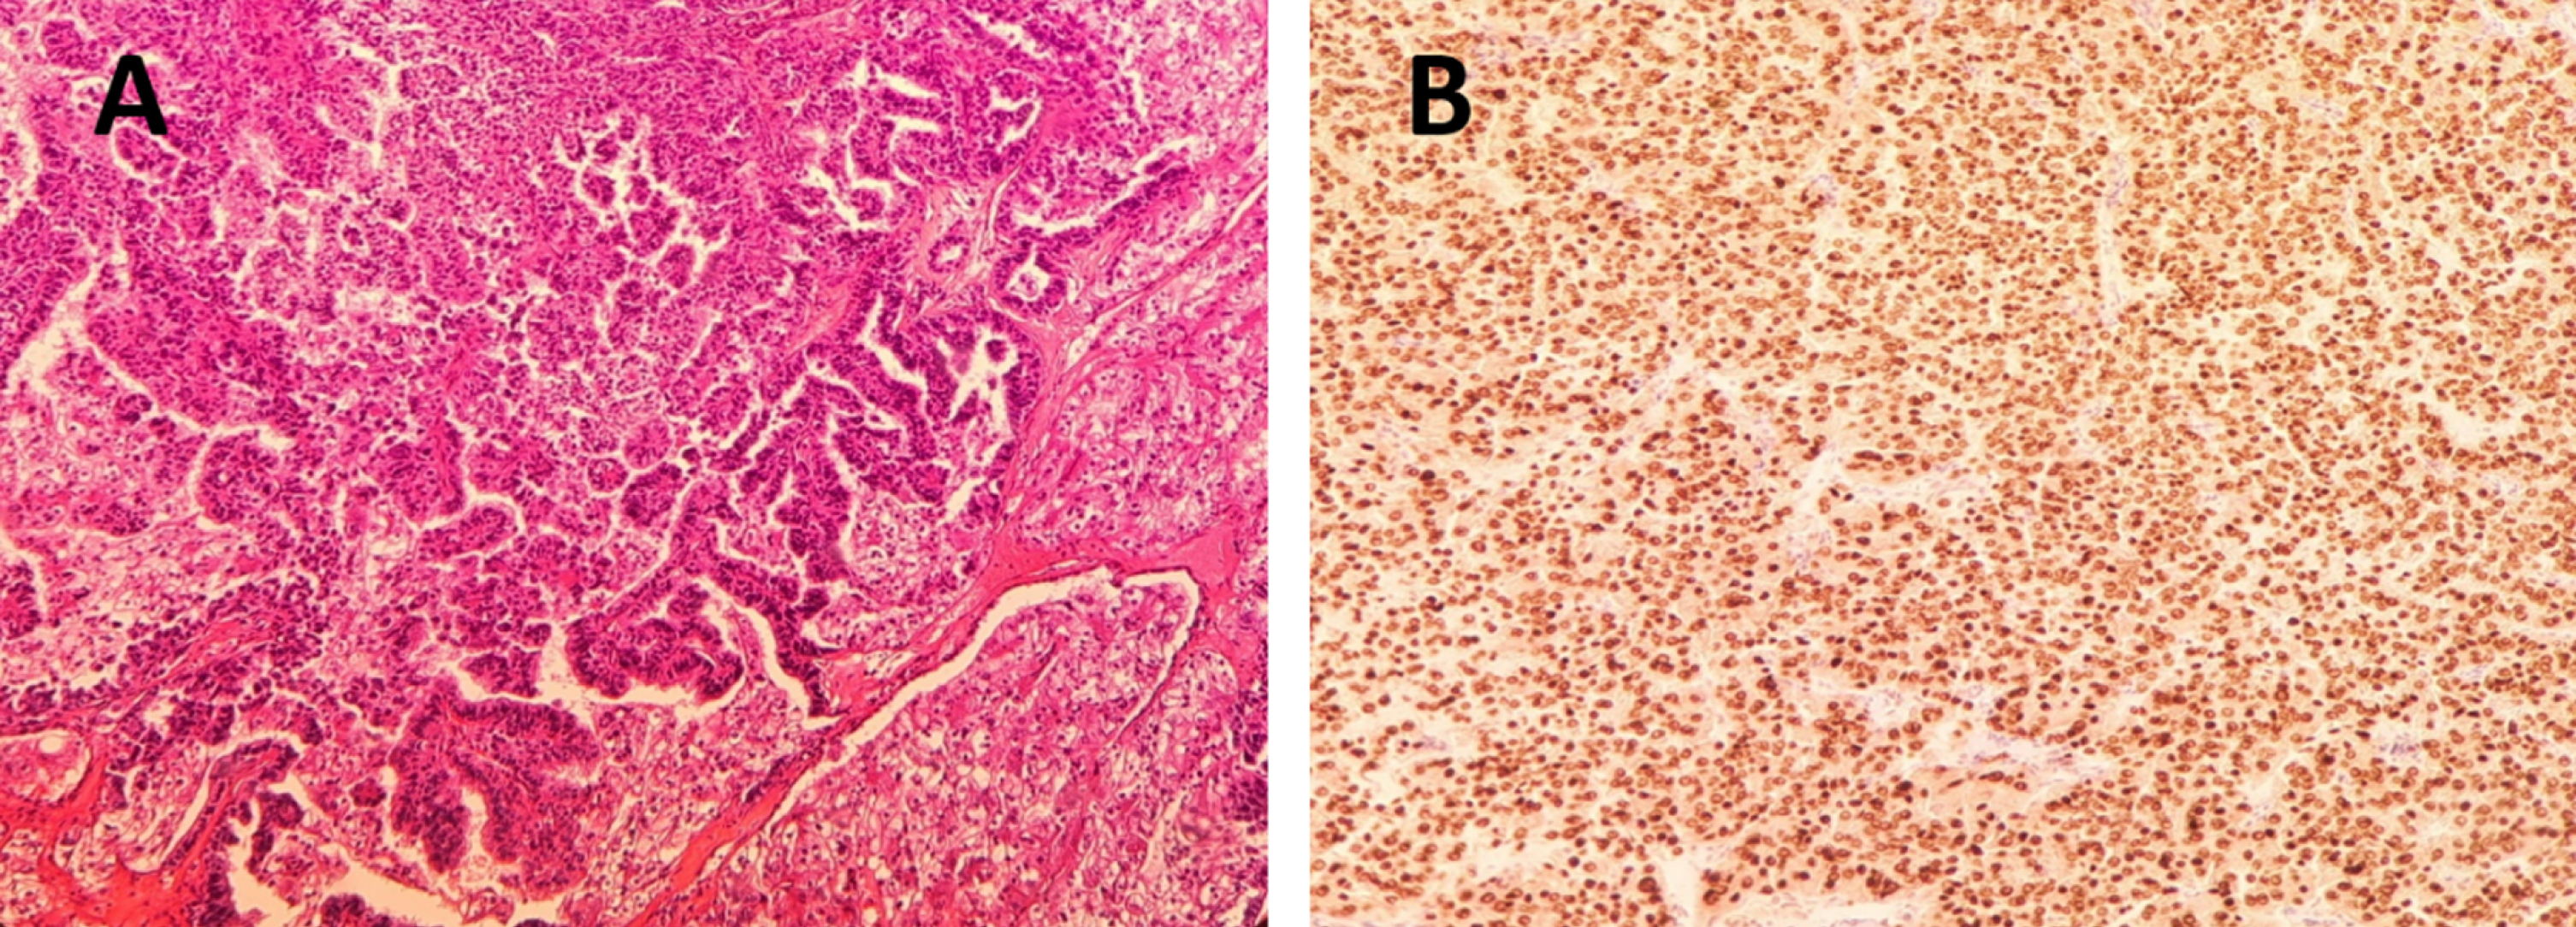 A. Hematoxylin-eosin staining 40x. Neoplastic proliferation of cells with clear eosinophilic cytoplasm distributed in a papillary pattern. B. TFE3 staining, 40X. With TFE3 immunohistochemistry technique, the clear eosinophilic cytoplasmic cells of the papillary component show intense and diffuse positive nuclear immunoreactivity.